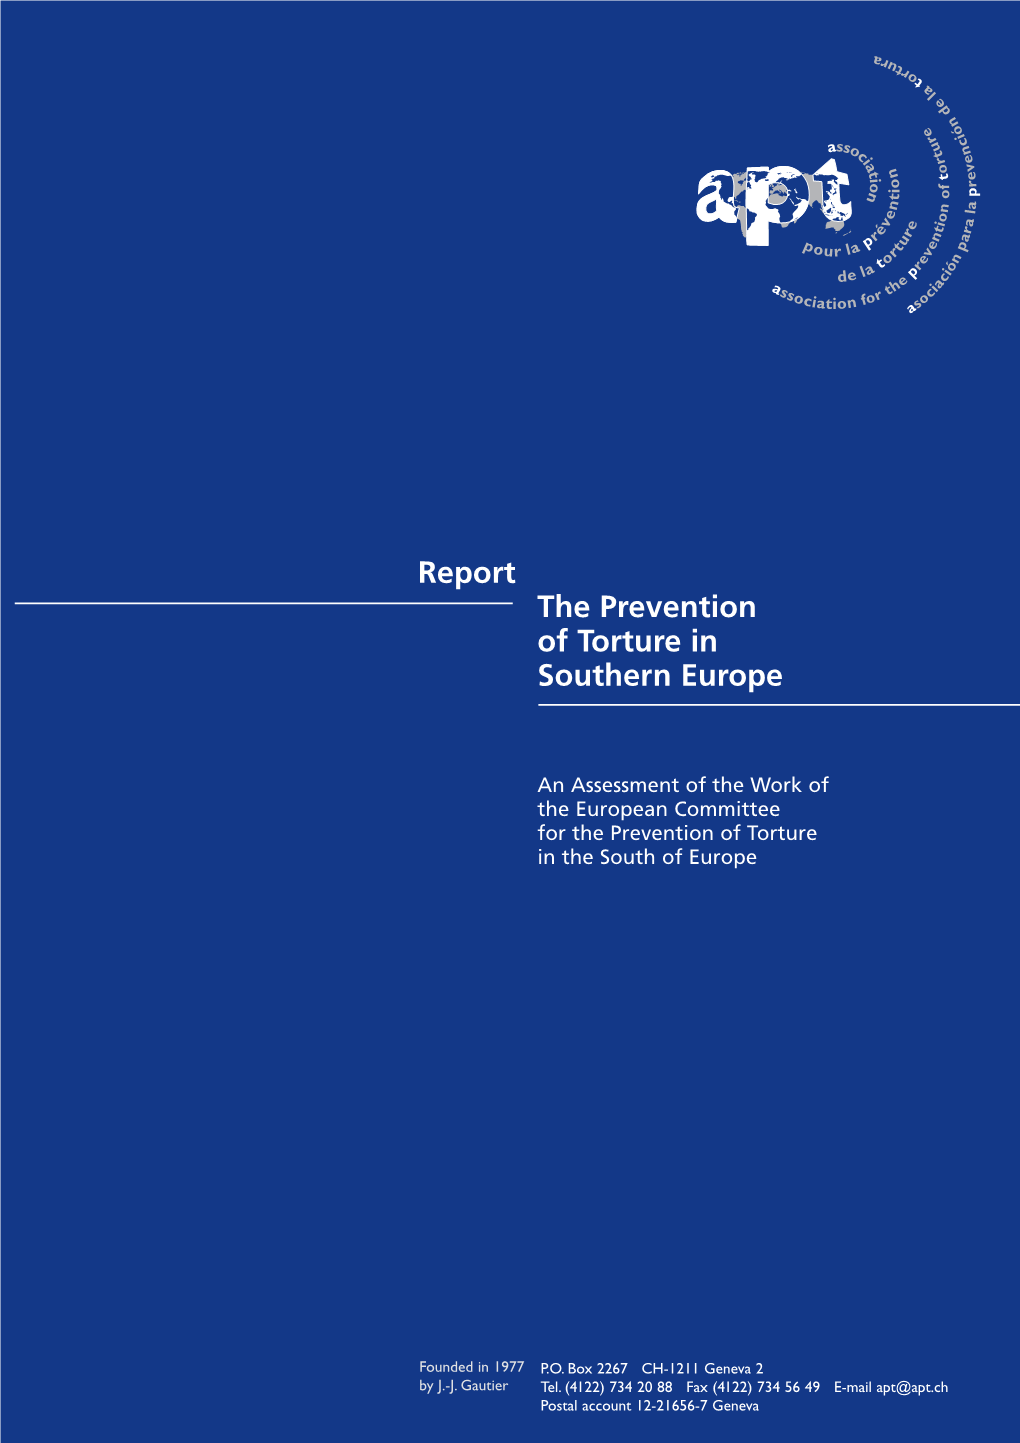 The Prevention of Torture in Southern Europe